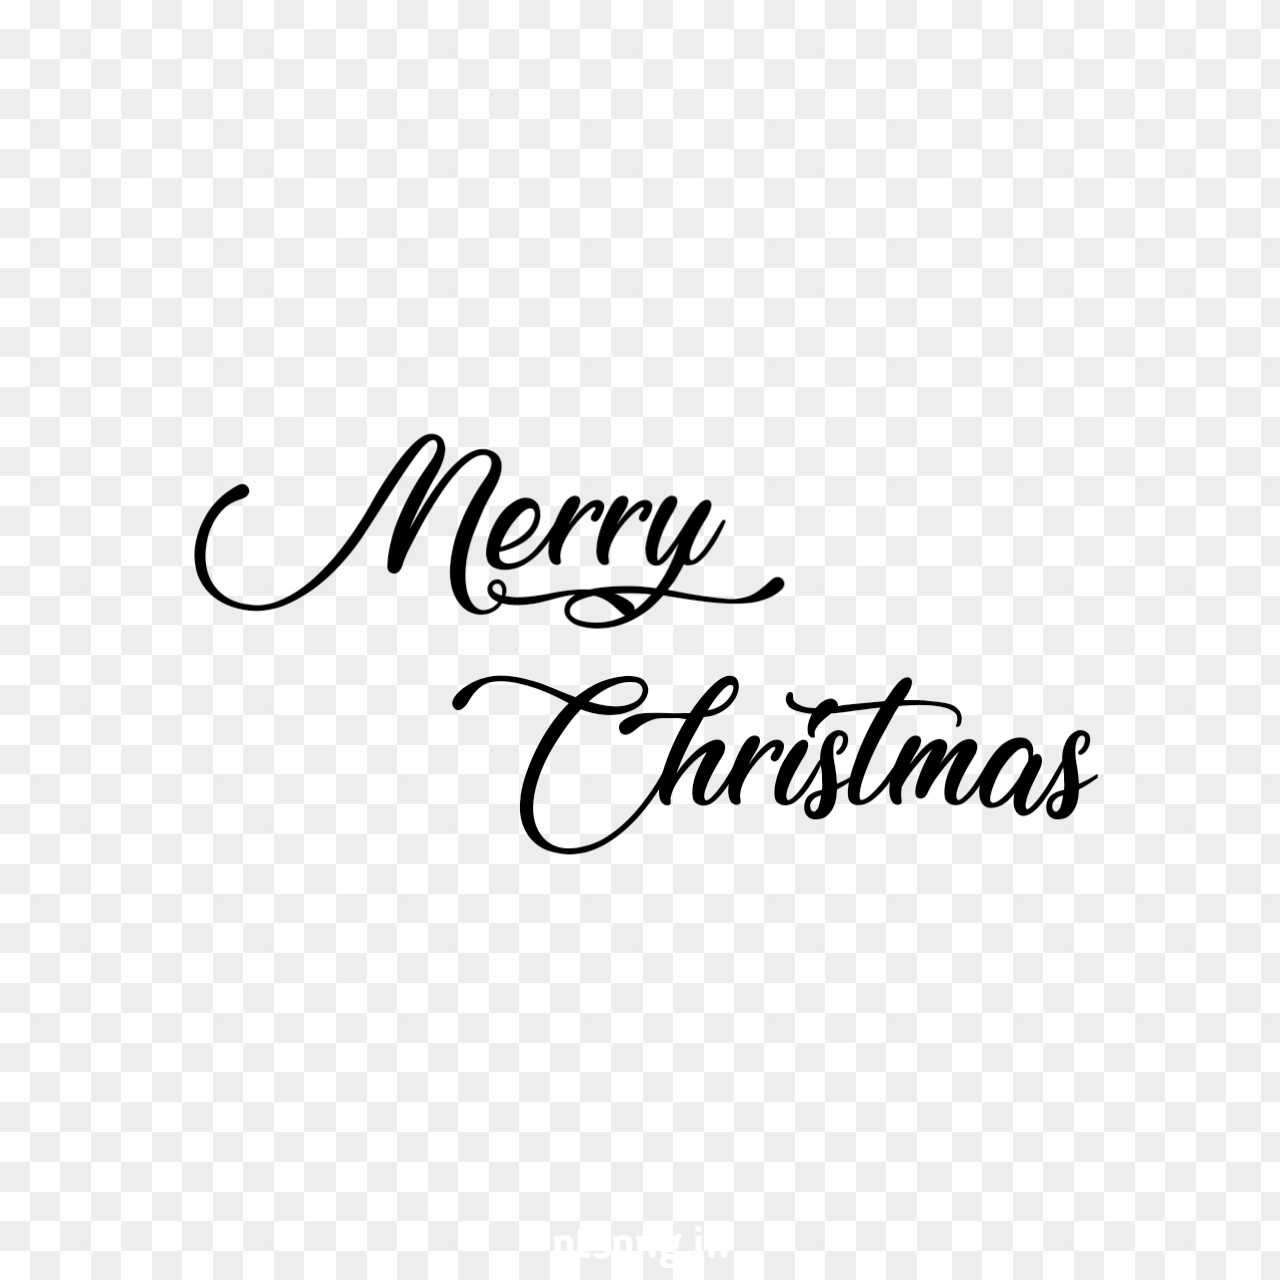 Merry christmas text PNG download 